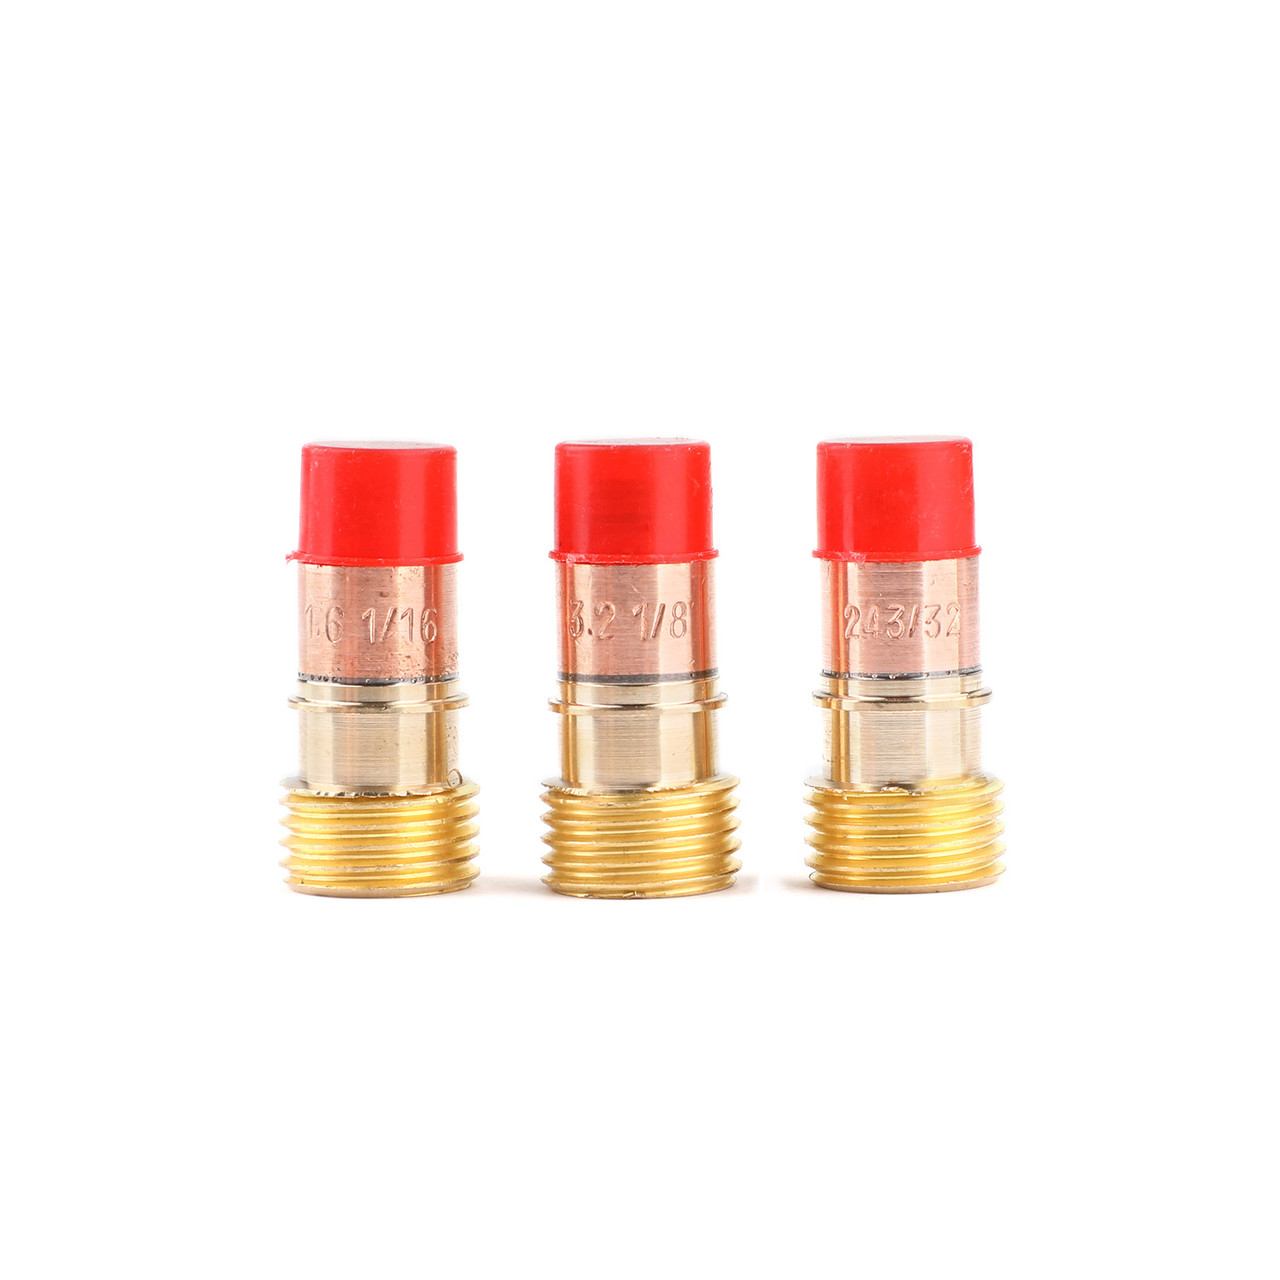 31Pcs TIG Welding Torch Accessories Stubby Gas Lens #12 Glass Cup Kit For WP-17 WP-18 WP-26